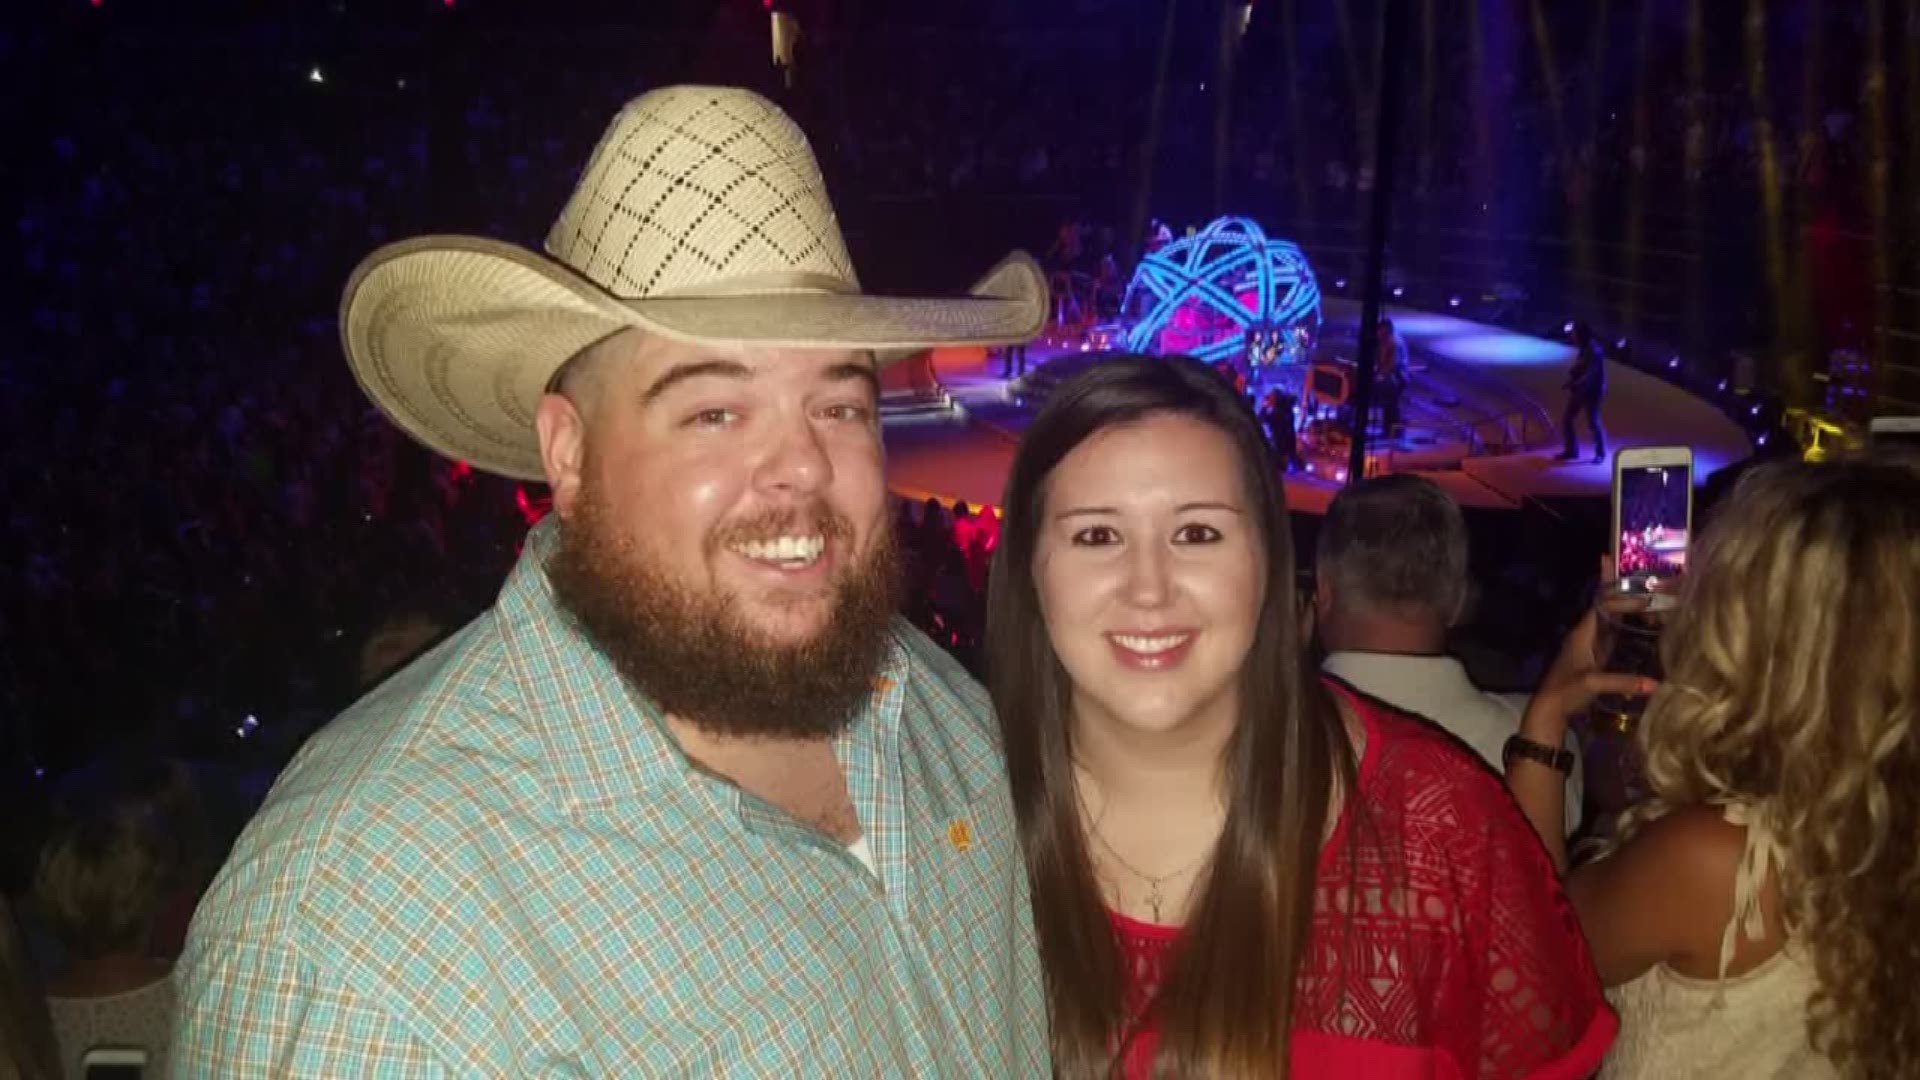 Bedford couple gets engaged at Garth Brooks concert